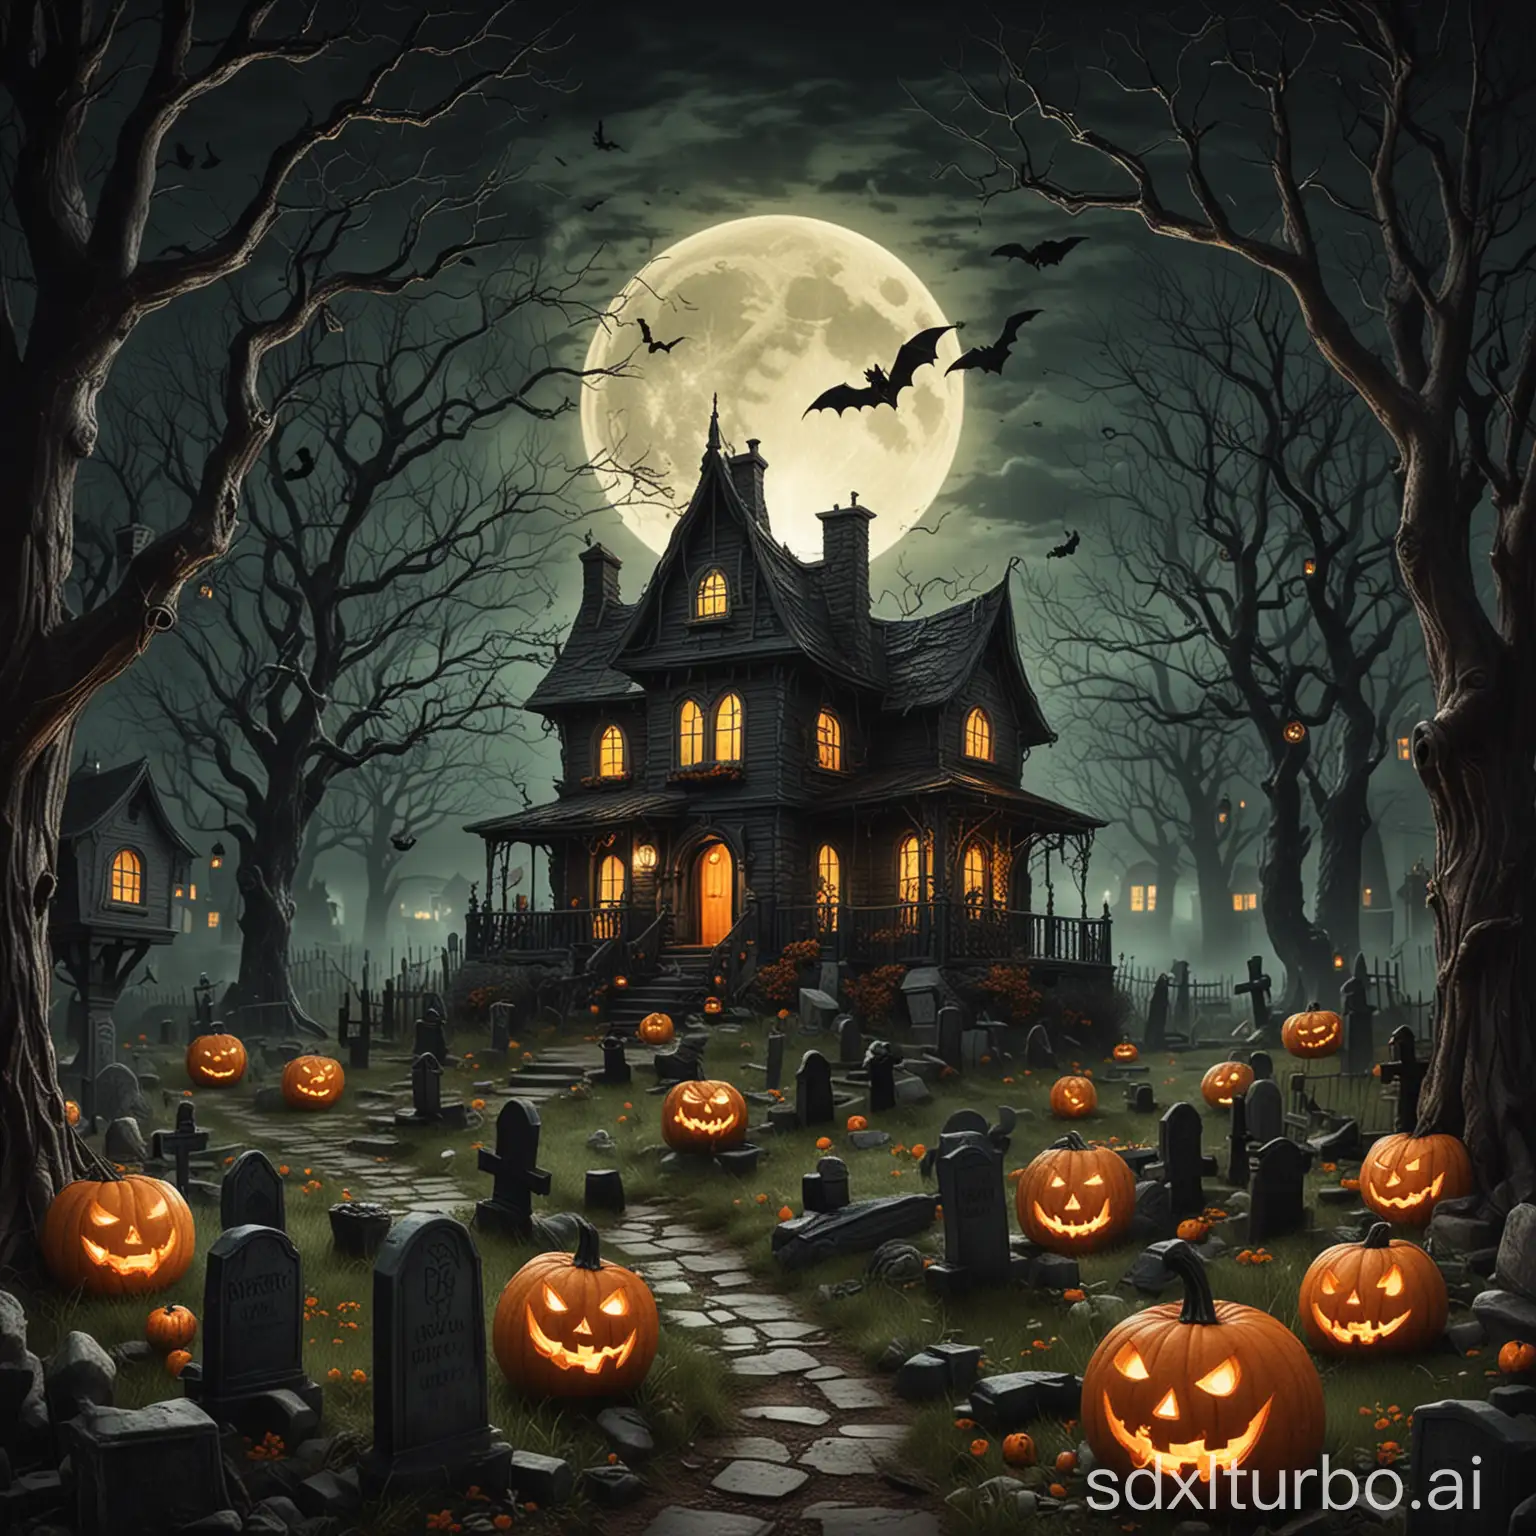 Create an illustration of a spooky Halloween night scene. Include a haunted house with glowing windows, surrounded by twisted trees and a full moon casting an eerie glow. Add classic Halloween elements such as bats flying in the sky, carved pumpkins with creepy faces, and ghosts peeking out from behind gravestones. Incorporate details like a black cat with arched back, spiders hanging from webs, and a witch on a broomstick flying across the moon. Use a dark, moody color palette with pops of bright orange and green to enhance the eerie atmosphere.